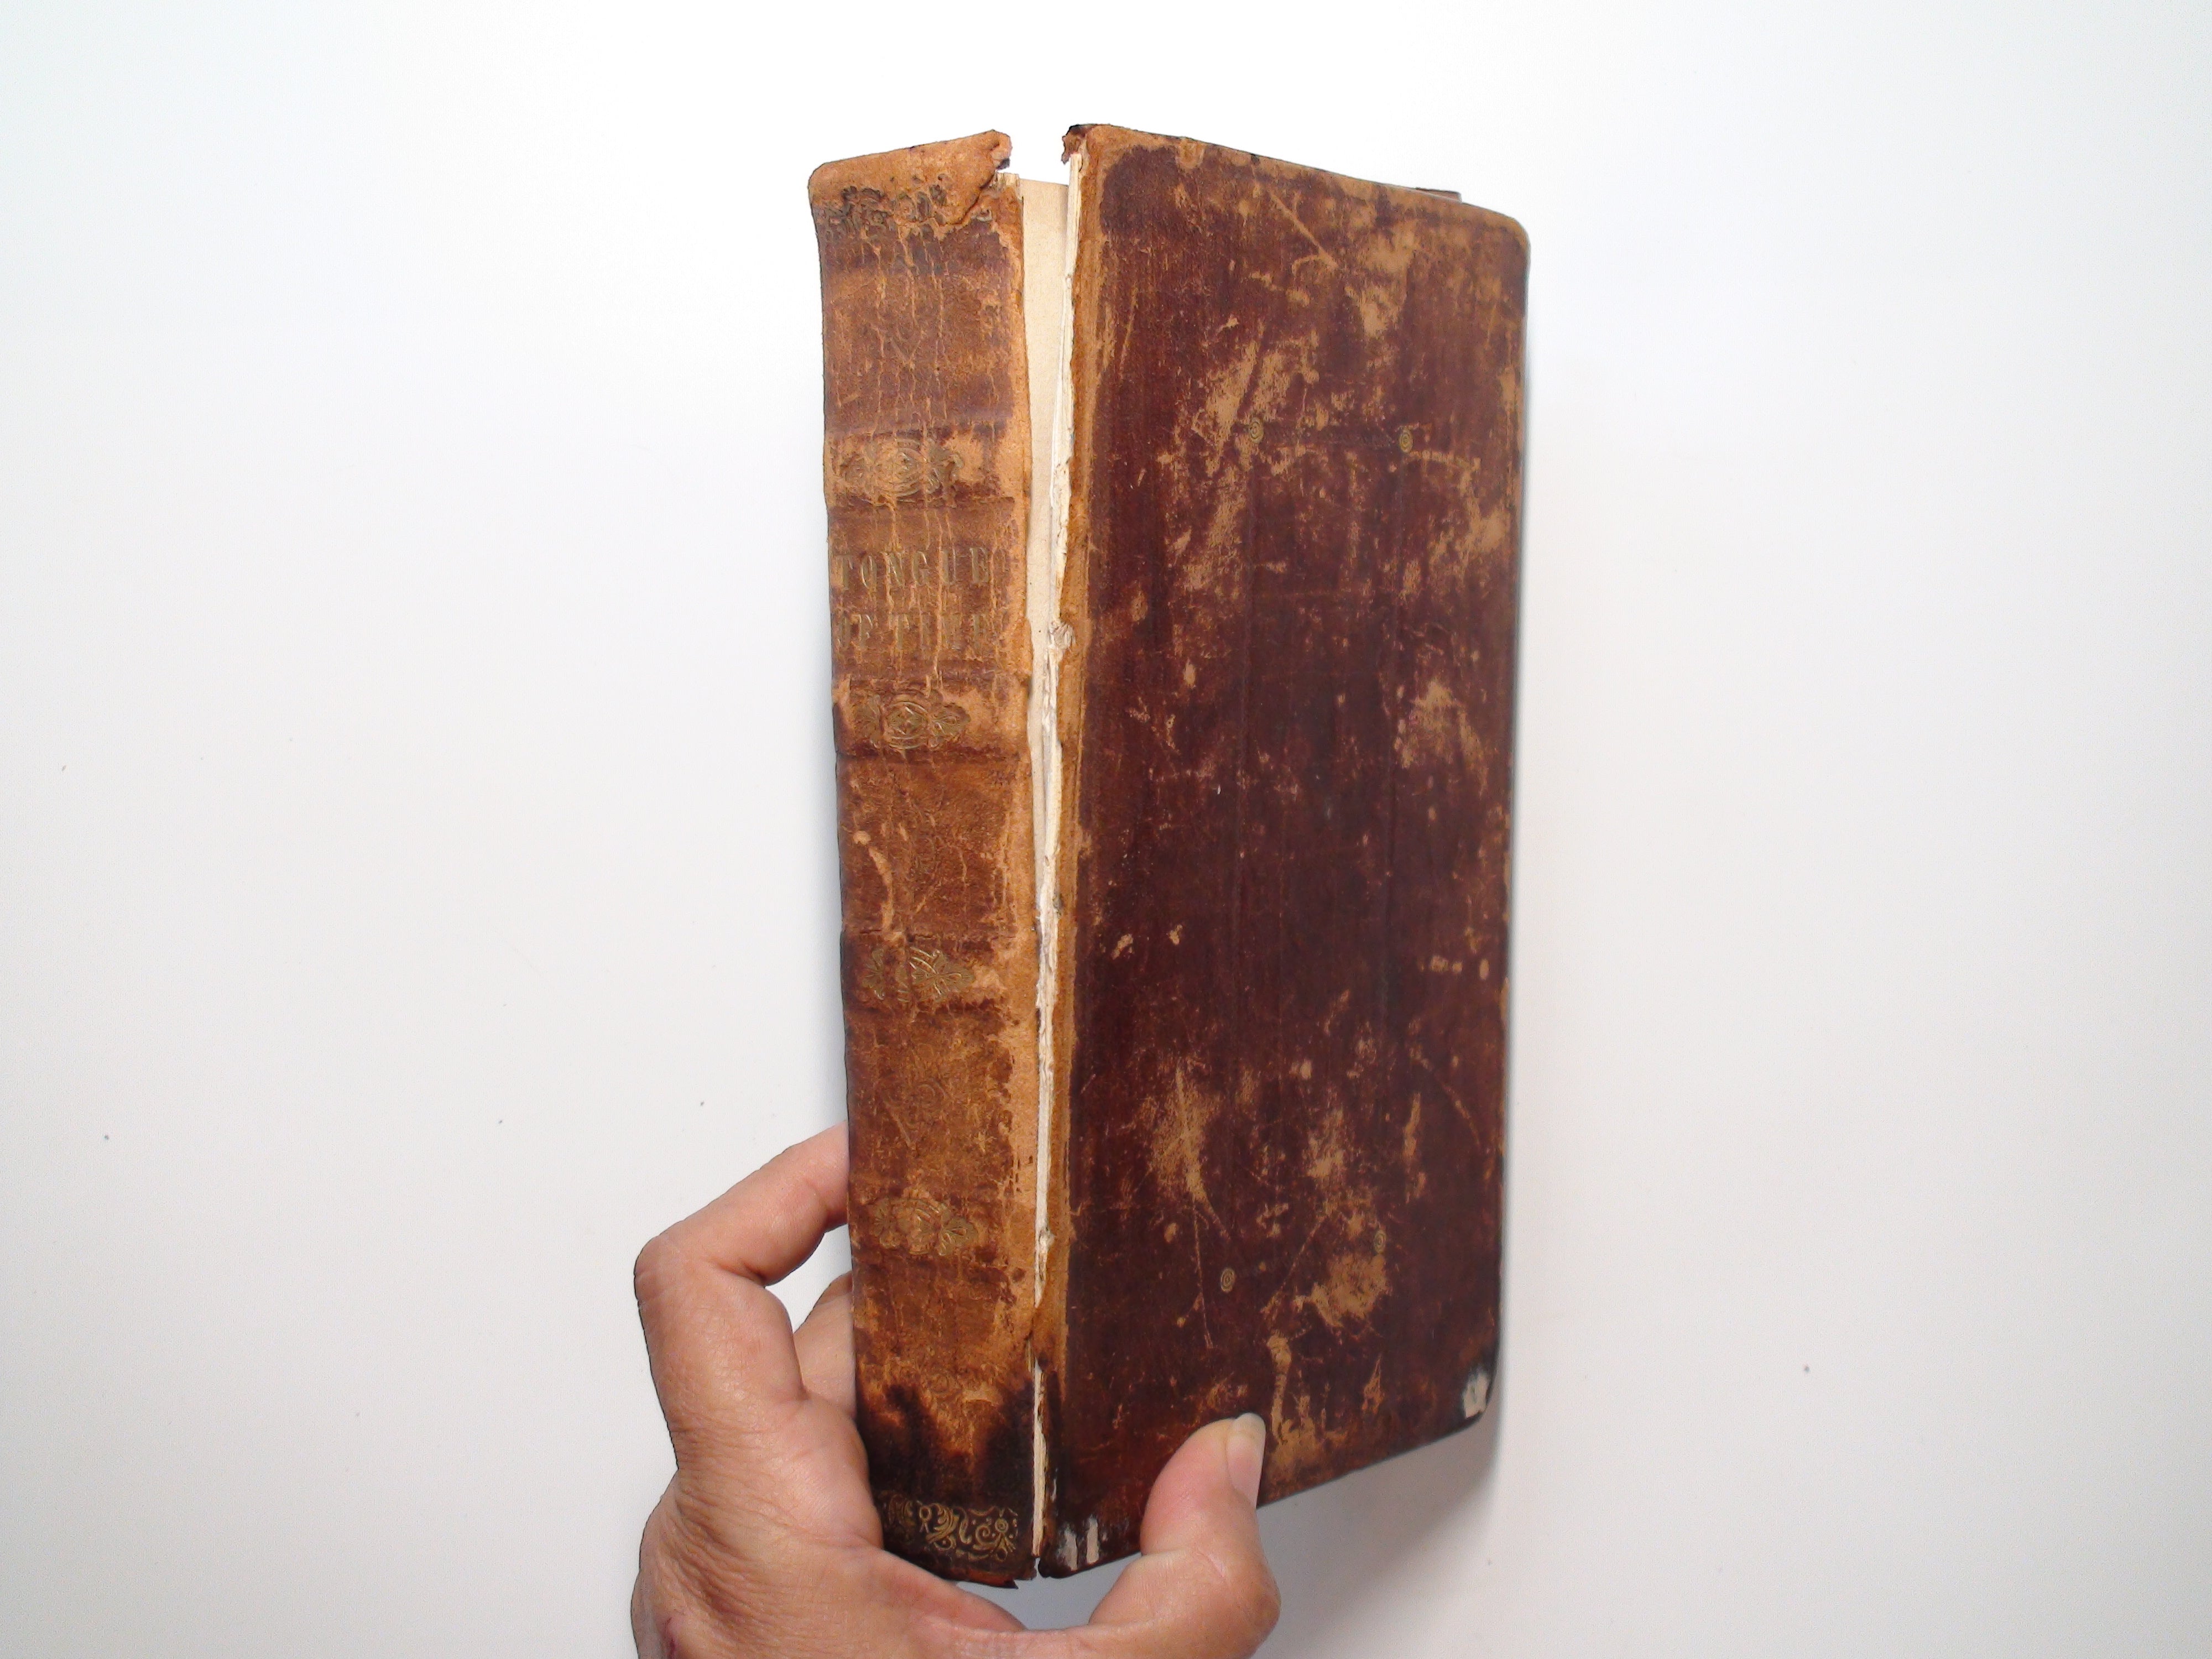 The Tongue of Time, Star of the States, Joseph Comstock, 1st Ed, Occult, 1840